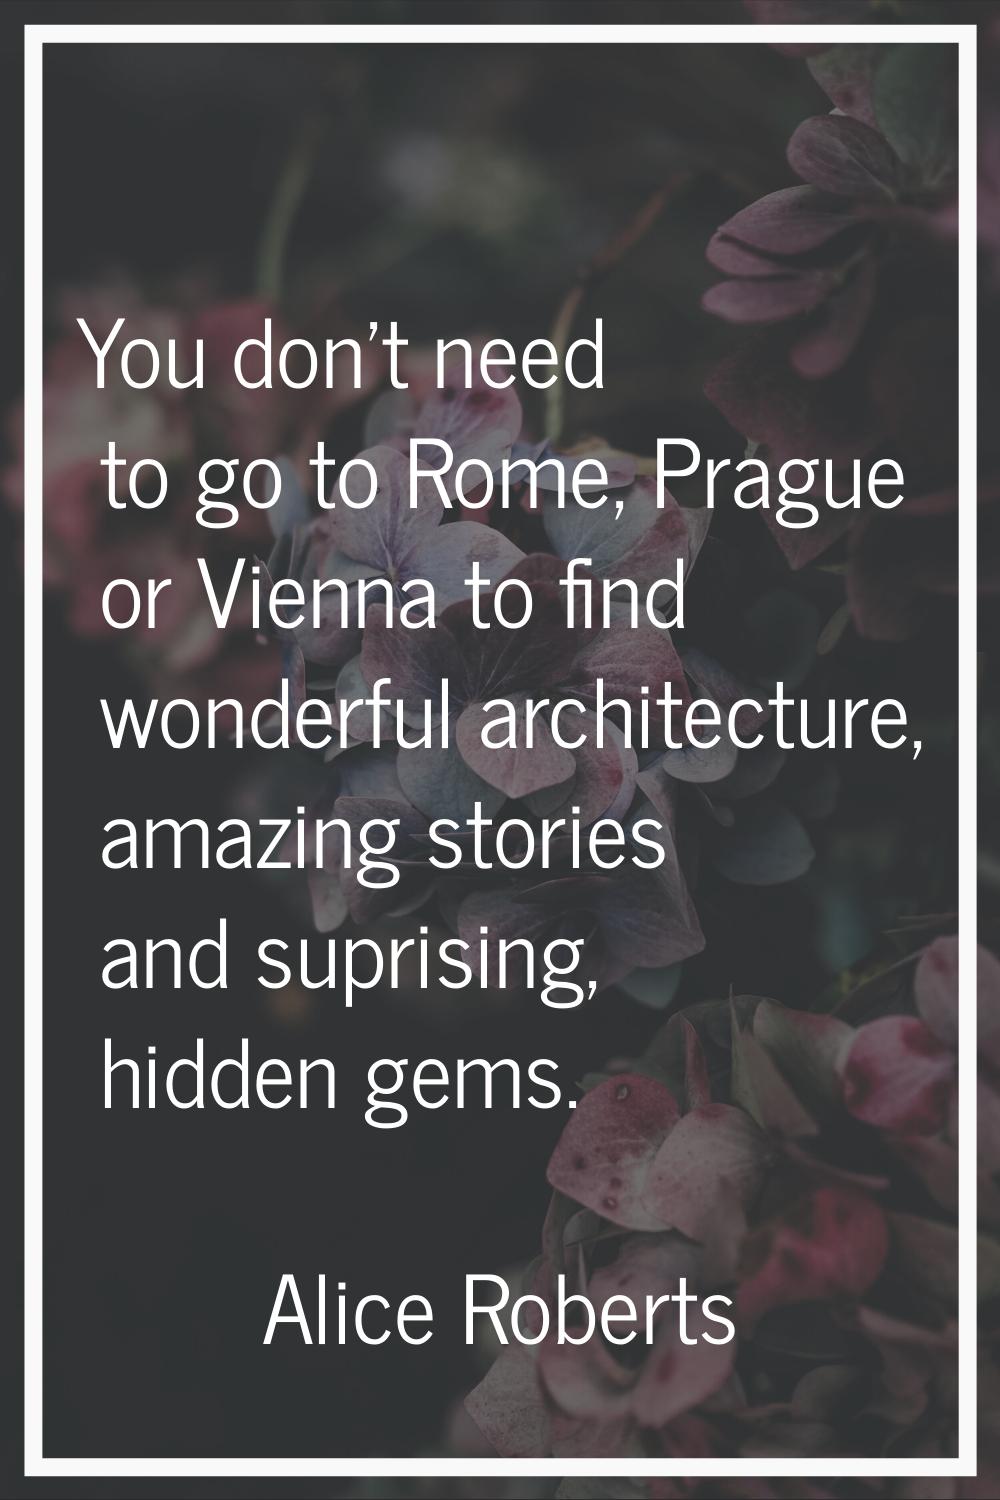 You don’t need to go to Rome, Prague or Vienna to find wonderful architecture, amazing stories and 